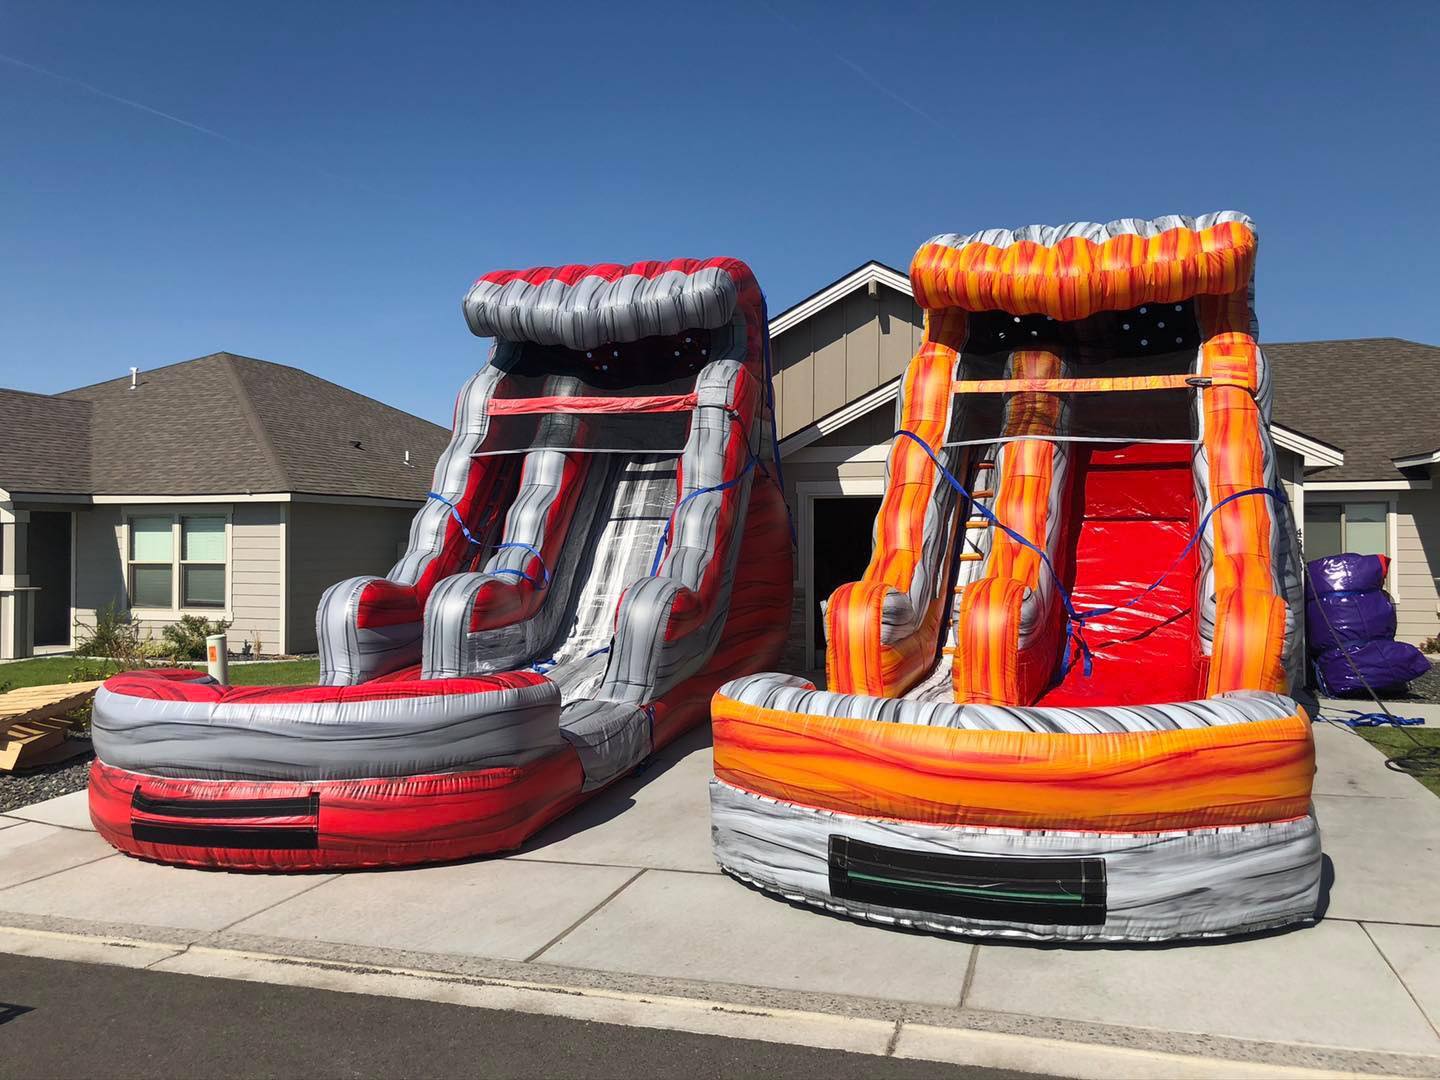 two 15ft water slides in orange or red